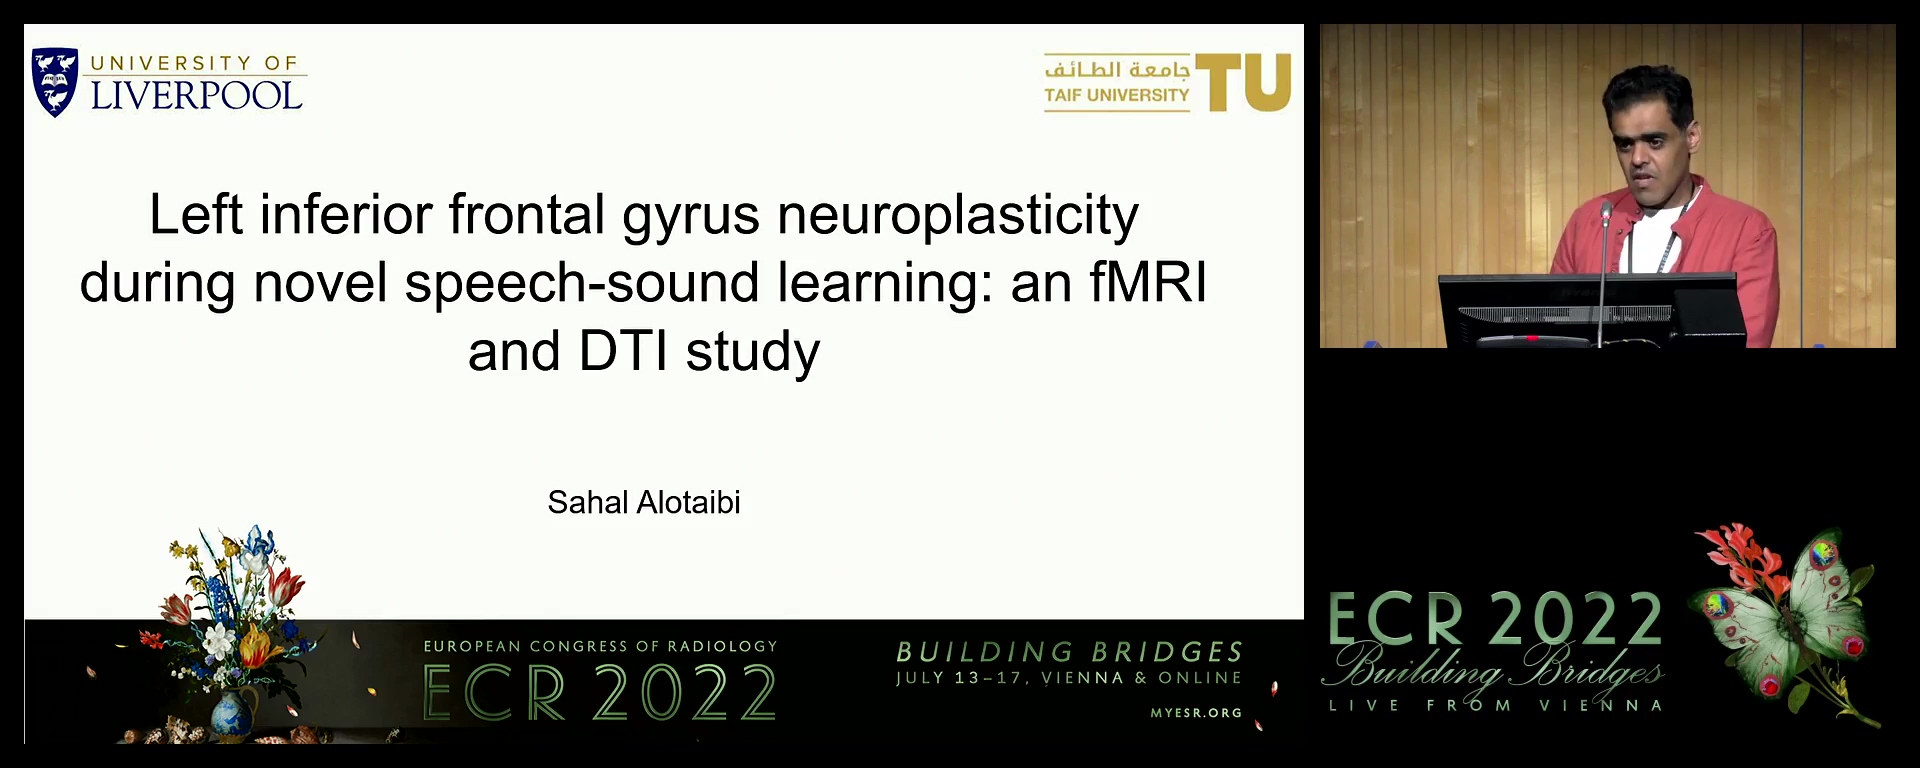 Left inferior frontal gyrus neuroplastisity during novel speech-sound learning: an fMRI and DTI study - Sahal Saad AL Otaibi, Liverpool / UK